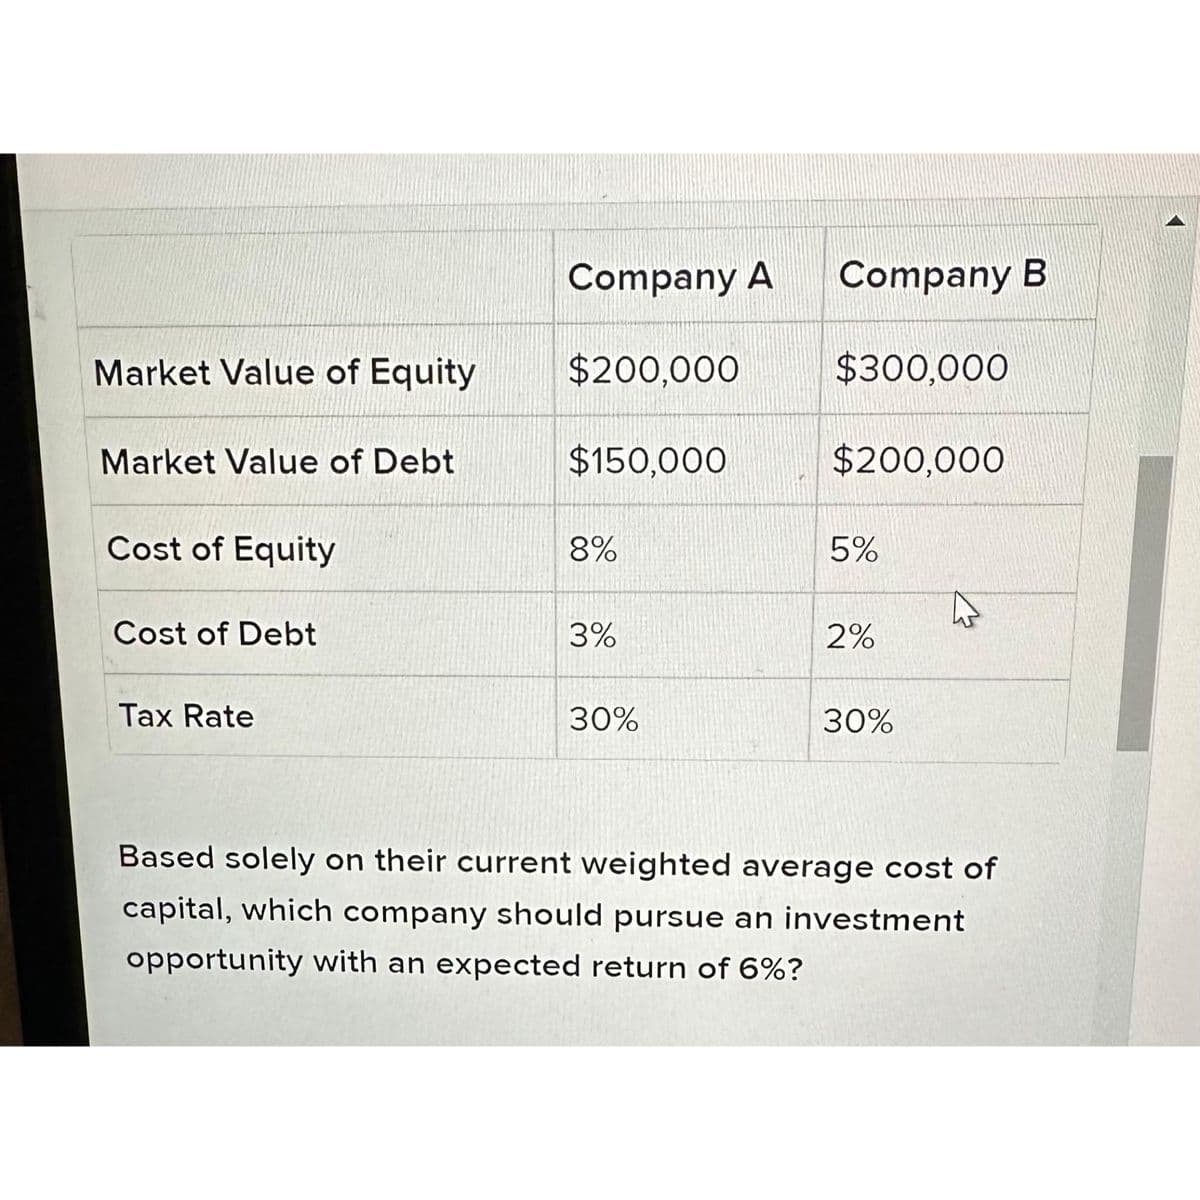 Market Value of Equity
Market Value of Debt
Cost of Equity
Cost of Debt
Tax Rate
Company A
$200,000
$150,000
8%
3%
30%
Company B
$300,000
$200,000
5%
2%
30%
^
Based solely on their current weighted average cost of
capital, which company should pursue an investment
opportunity with an expected return of 6%?